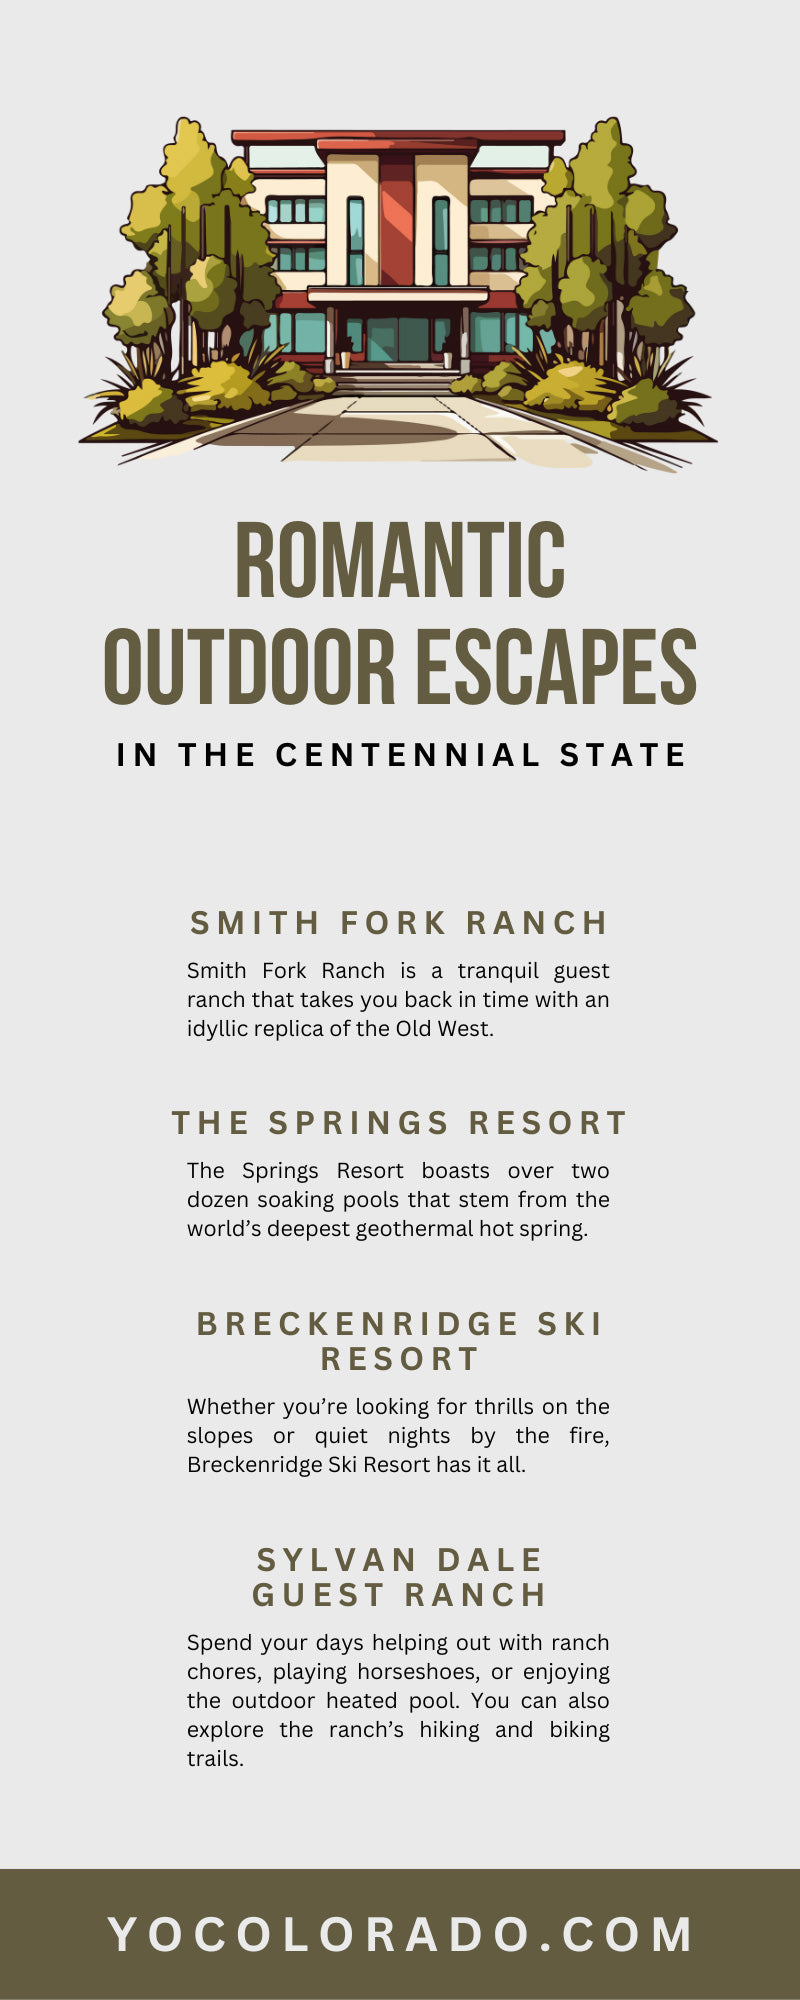 Romantic Outdoor Escapes in the Centennial State